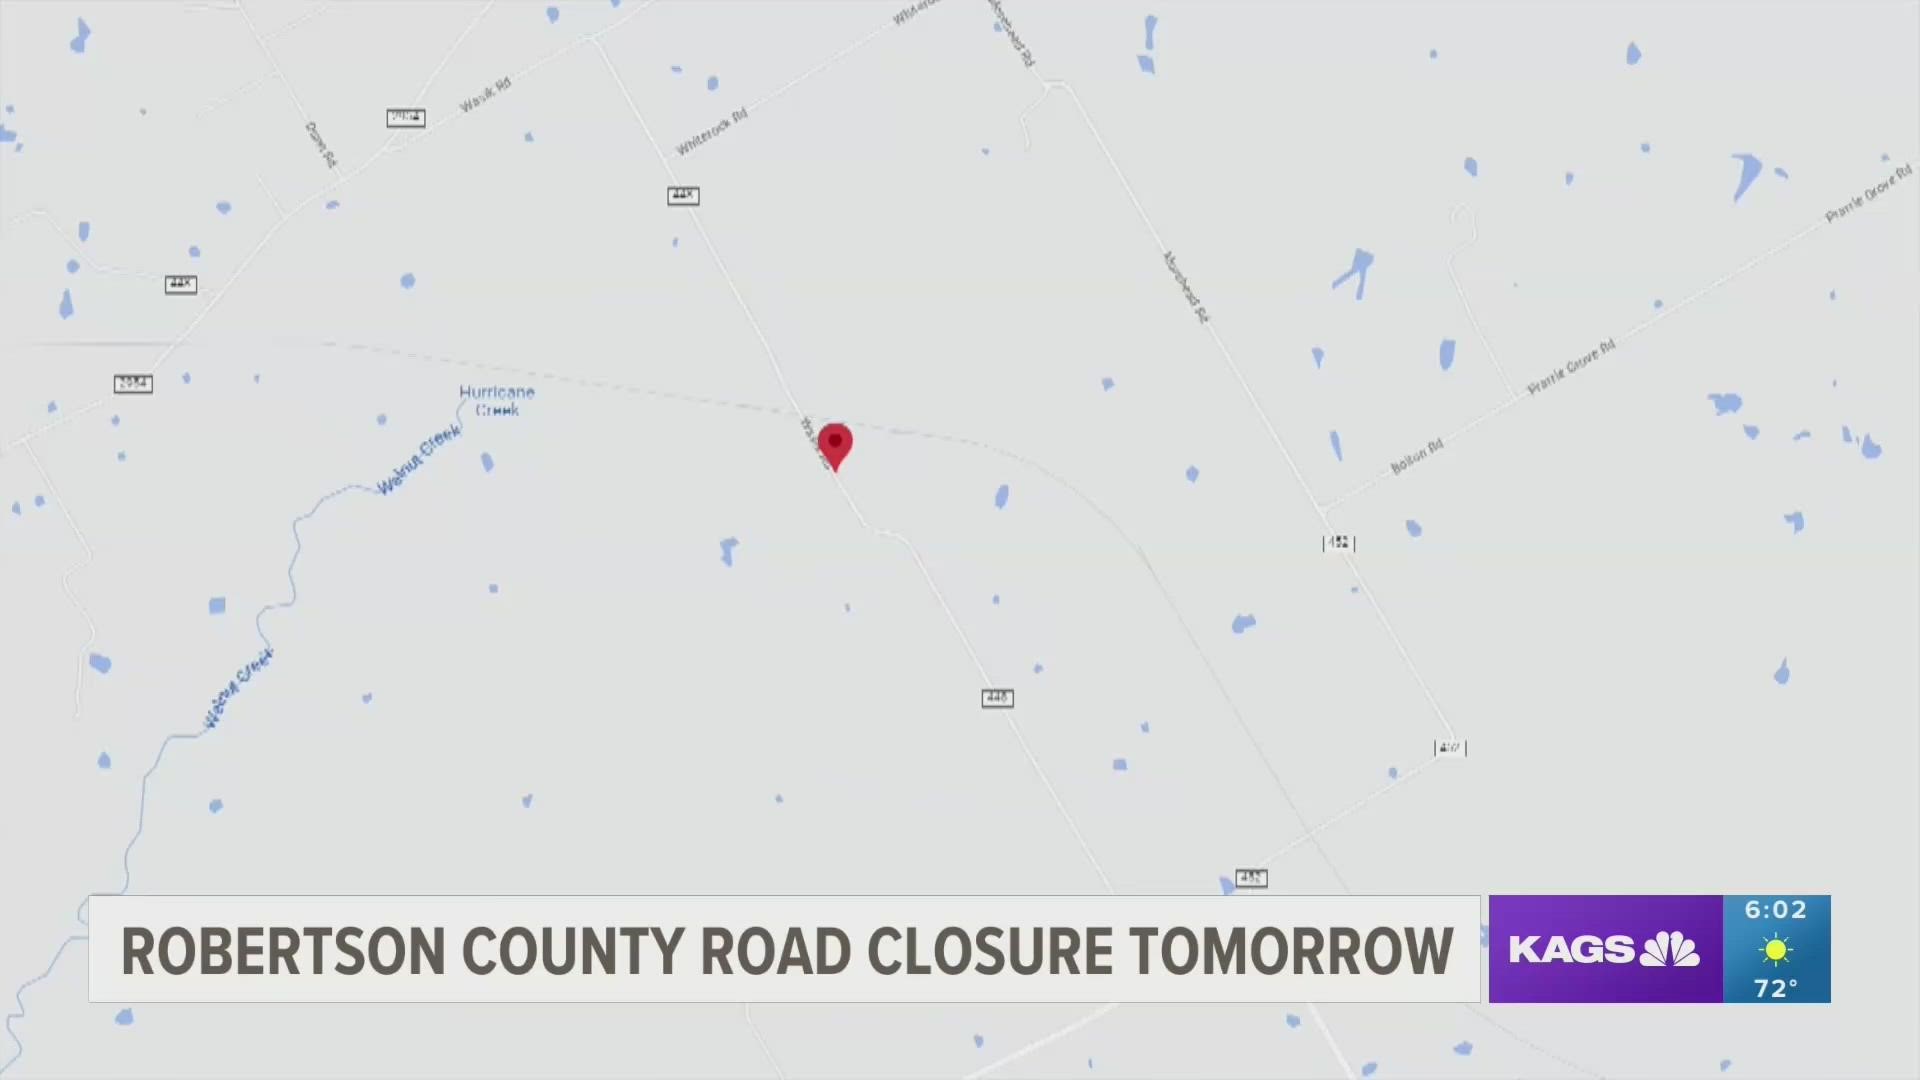 The repairs are set to start at 8 a.m. on Thursday, Feb. 9, and run through the end of the work day, according to the Robertson County Sheriff's Office.